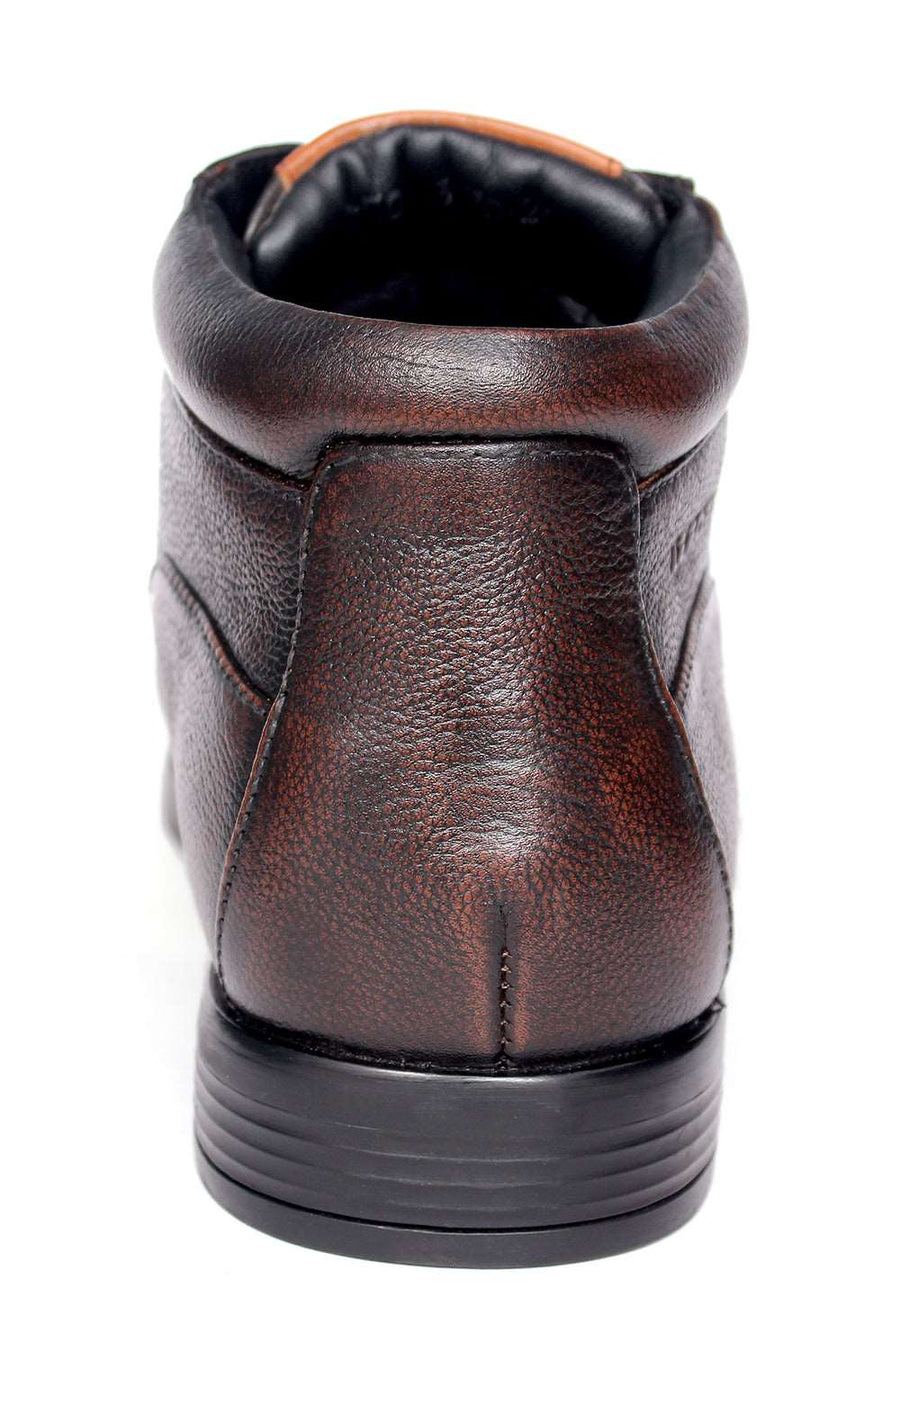 Real Leather Formal Ankle Boot